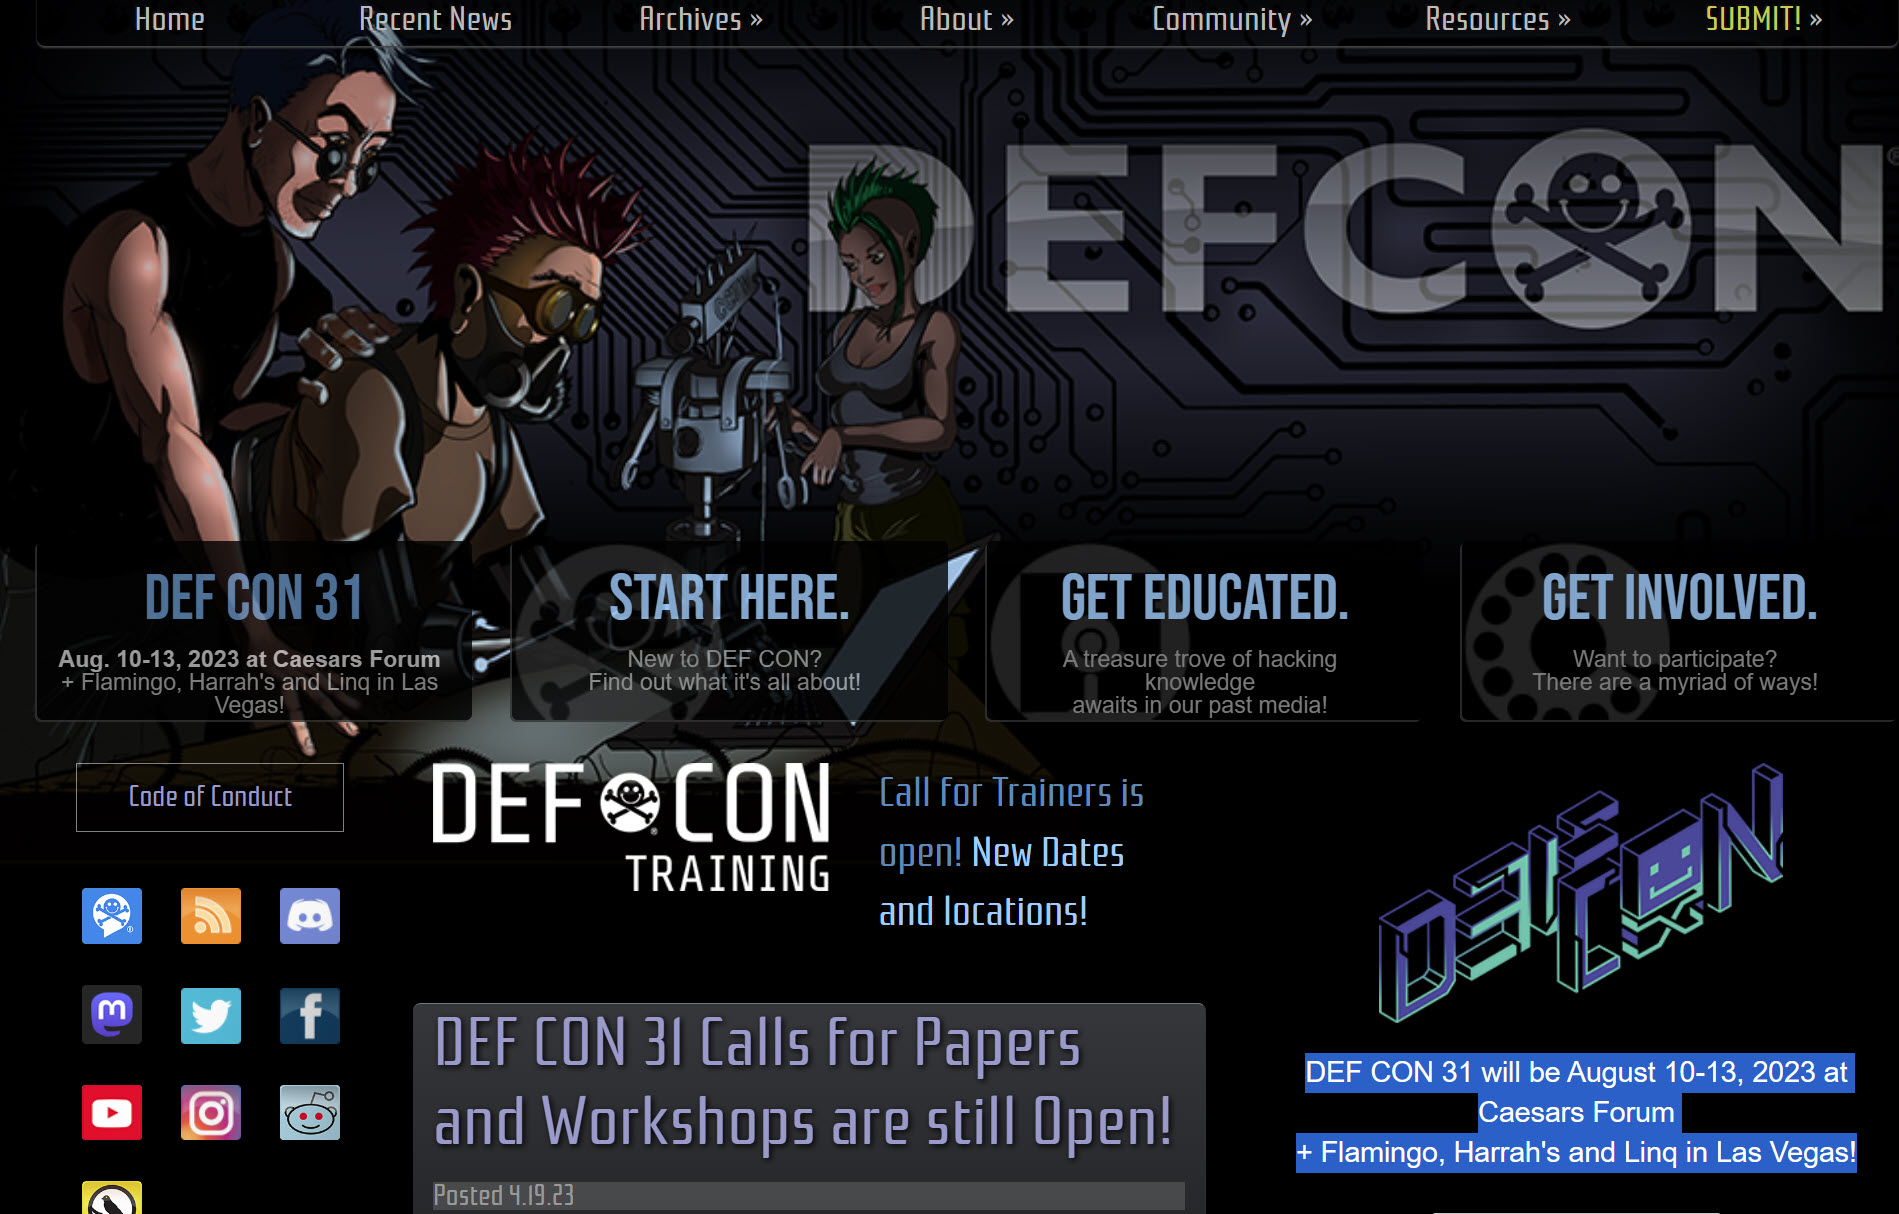 DEF CON 31 LIVE on Cyber Security in 2023 Las Vegas